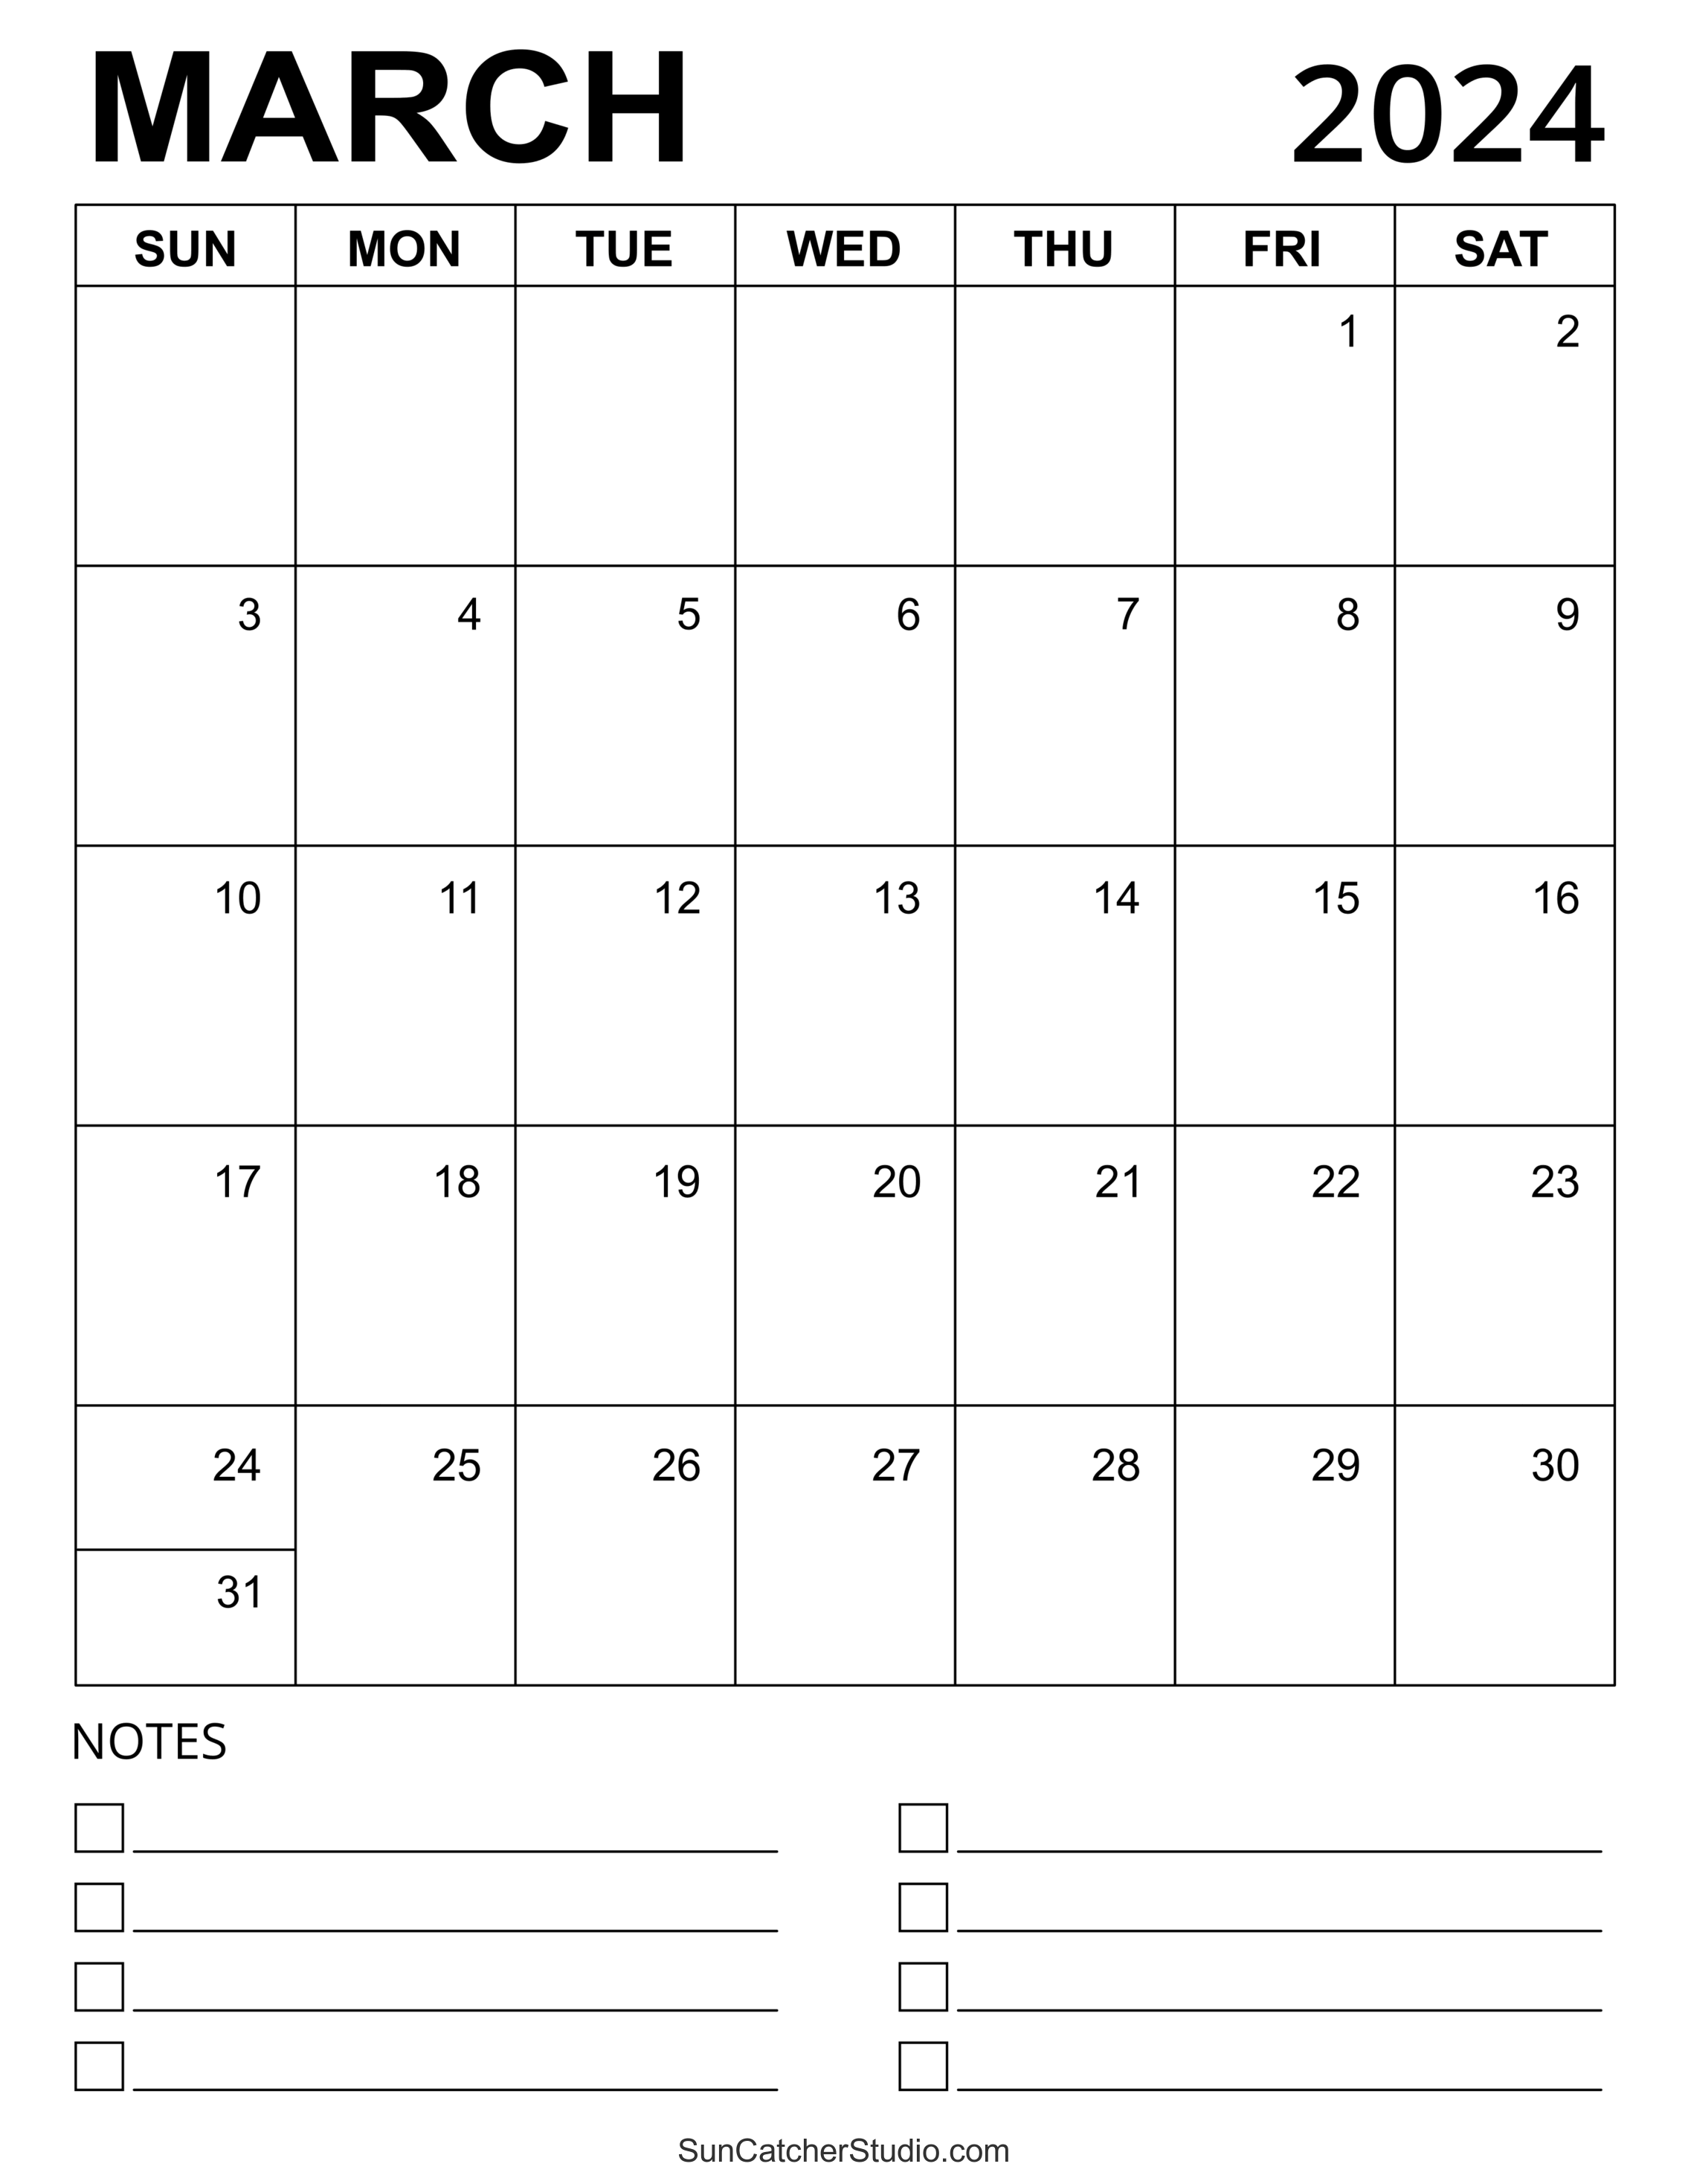 March 2024 Calendar (Free Printable) DIY Projects, Patterns